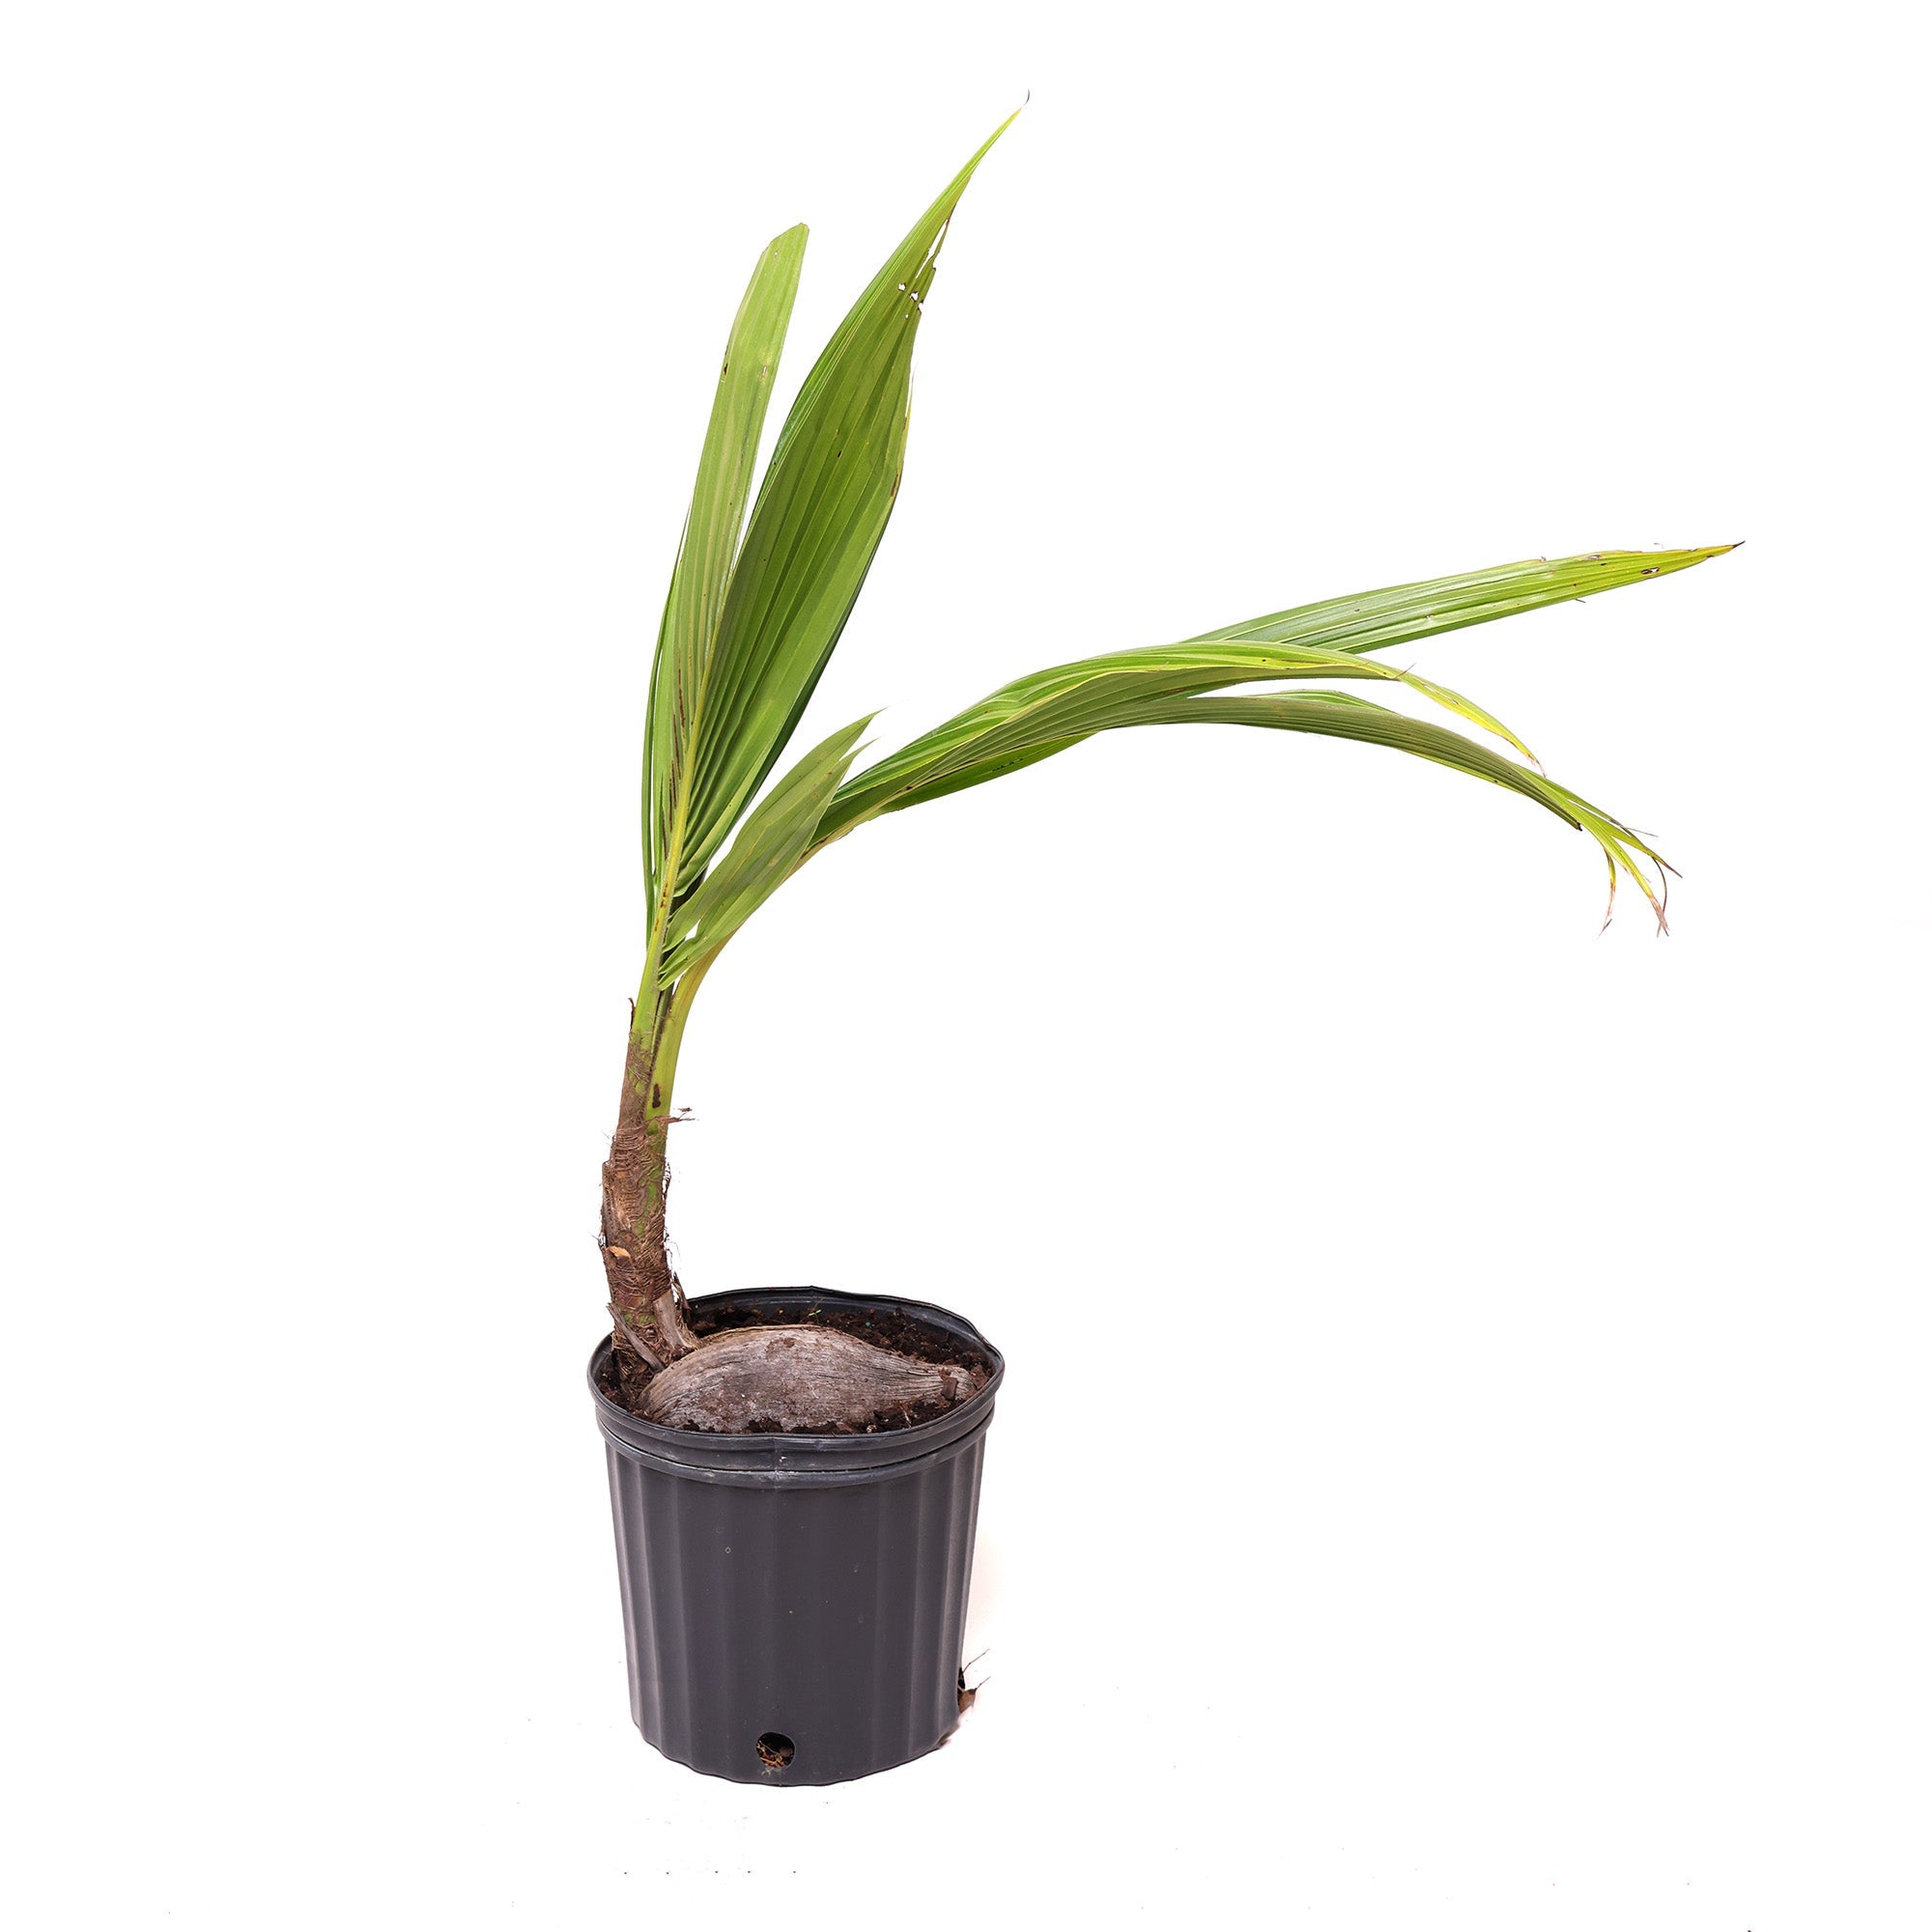 A young Chive Studio Coconut 10 Inches palm plant with slender leaves in a small black plastic pot against a white background.